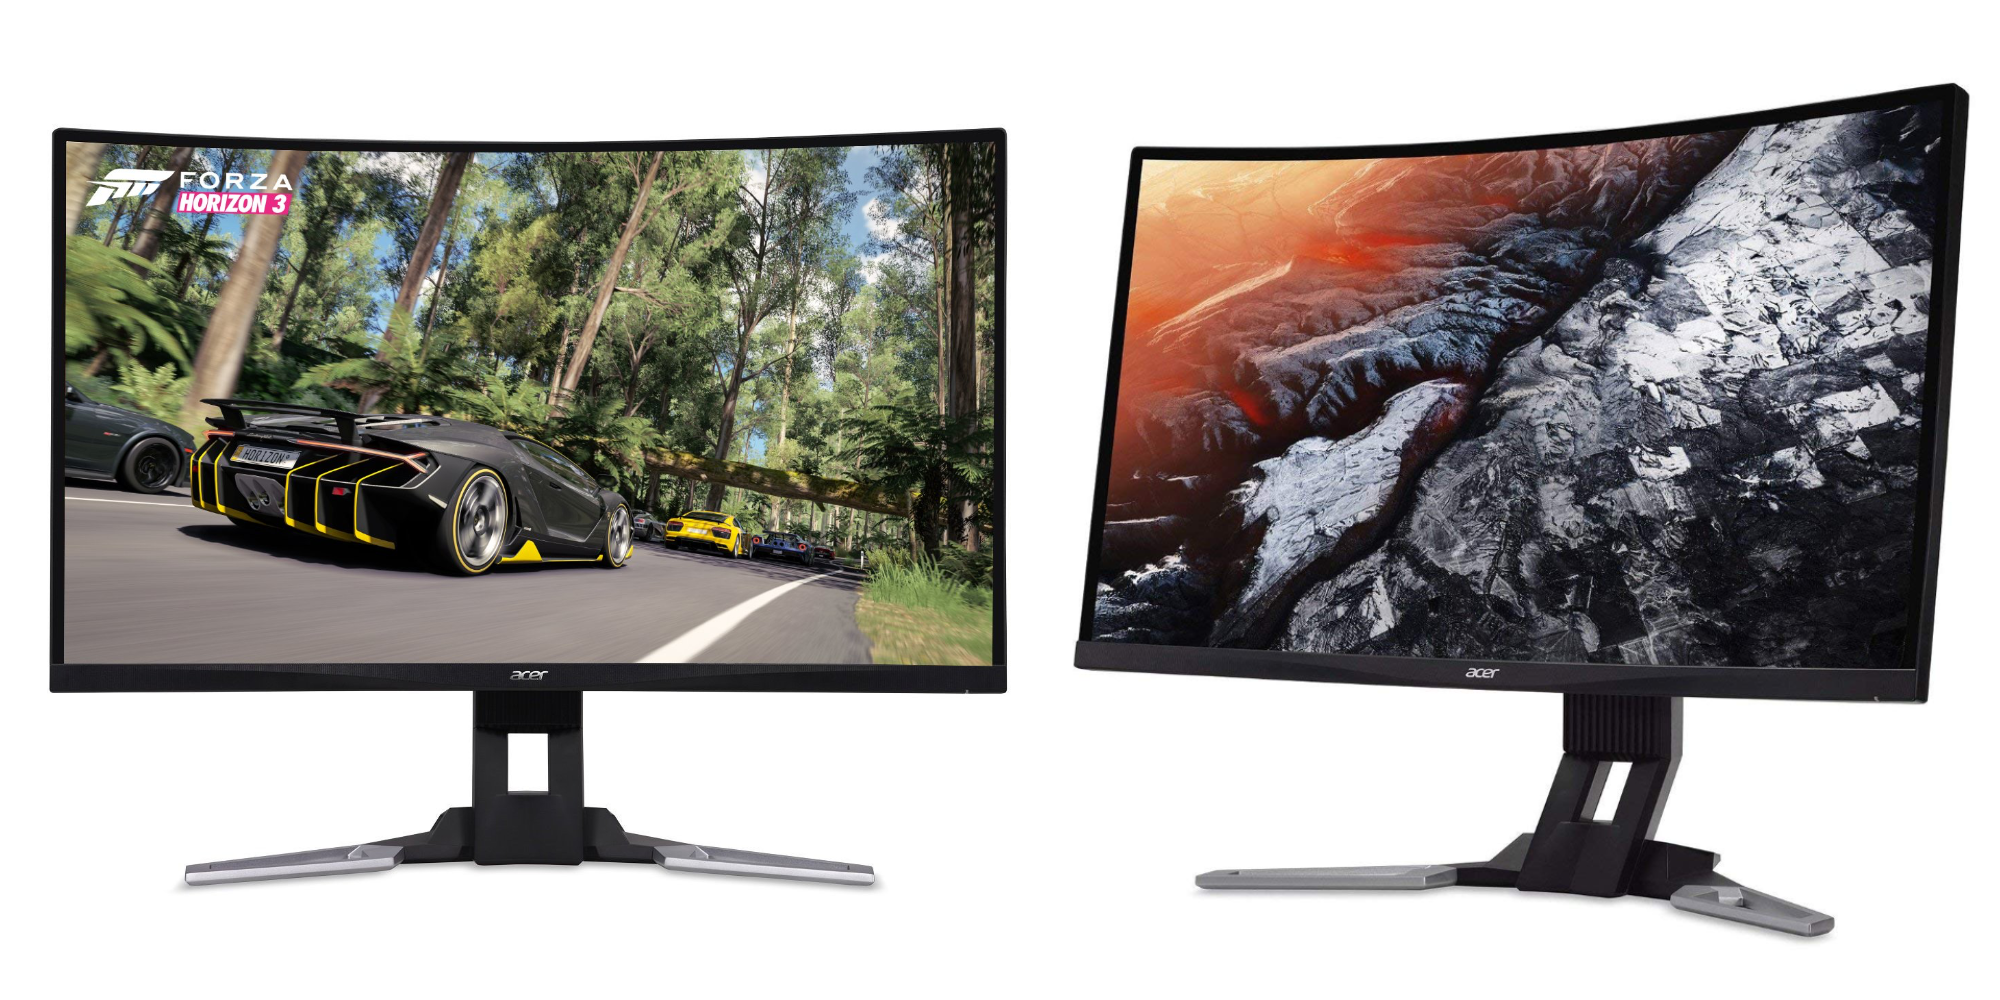 Acer's Curved 1440p Monitor drops to Amazon low at $400 (24% more